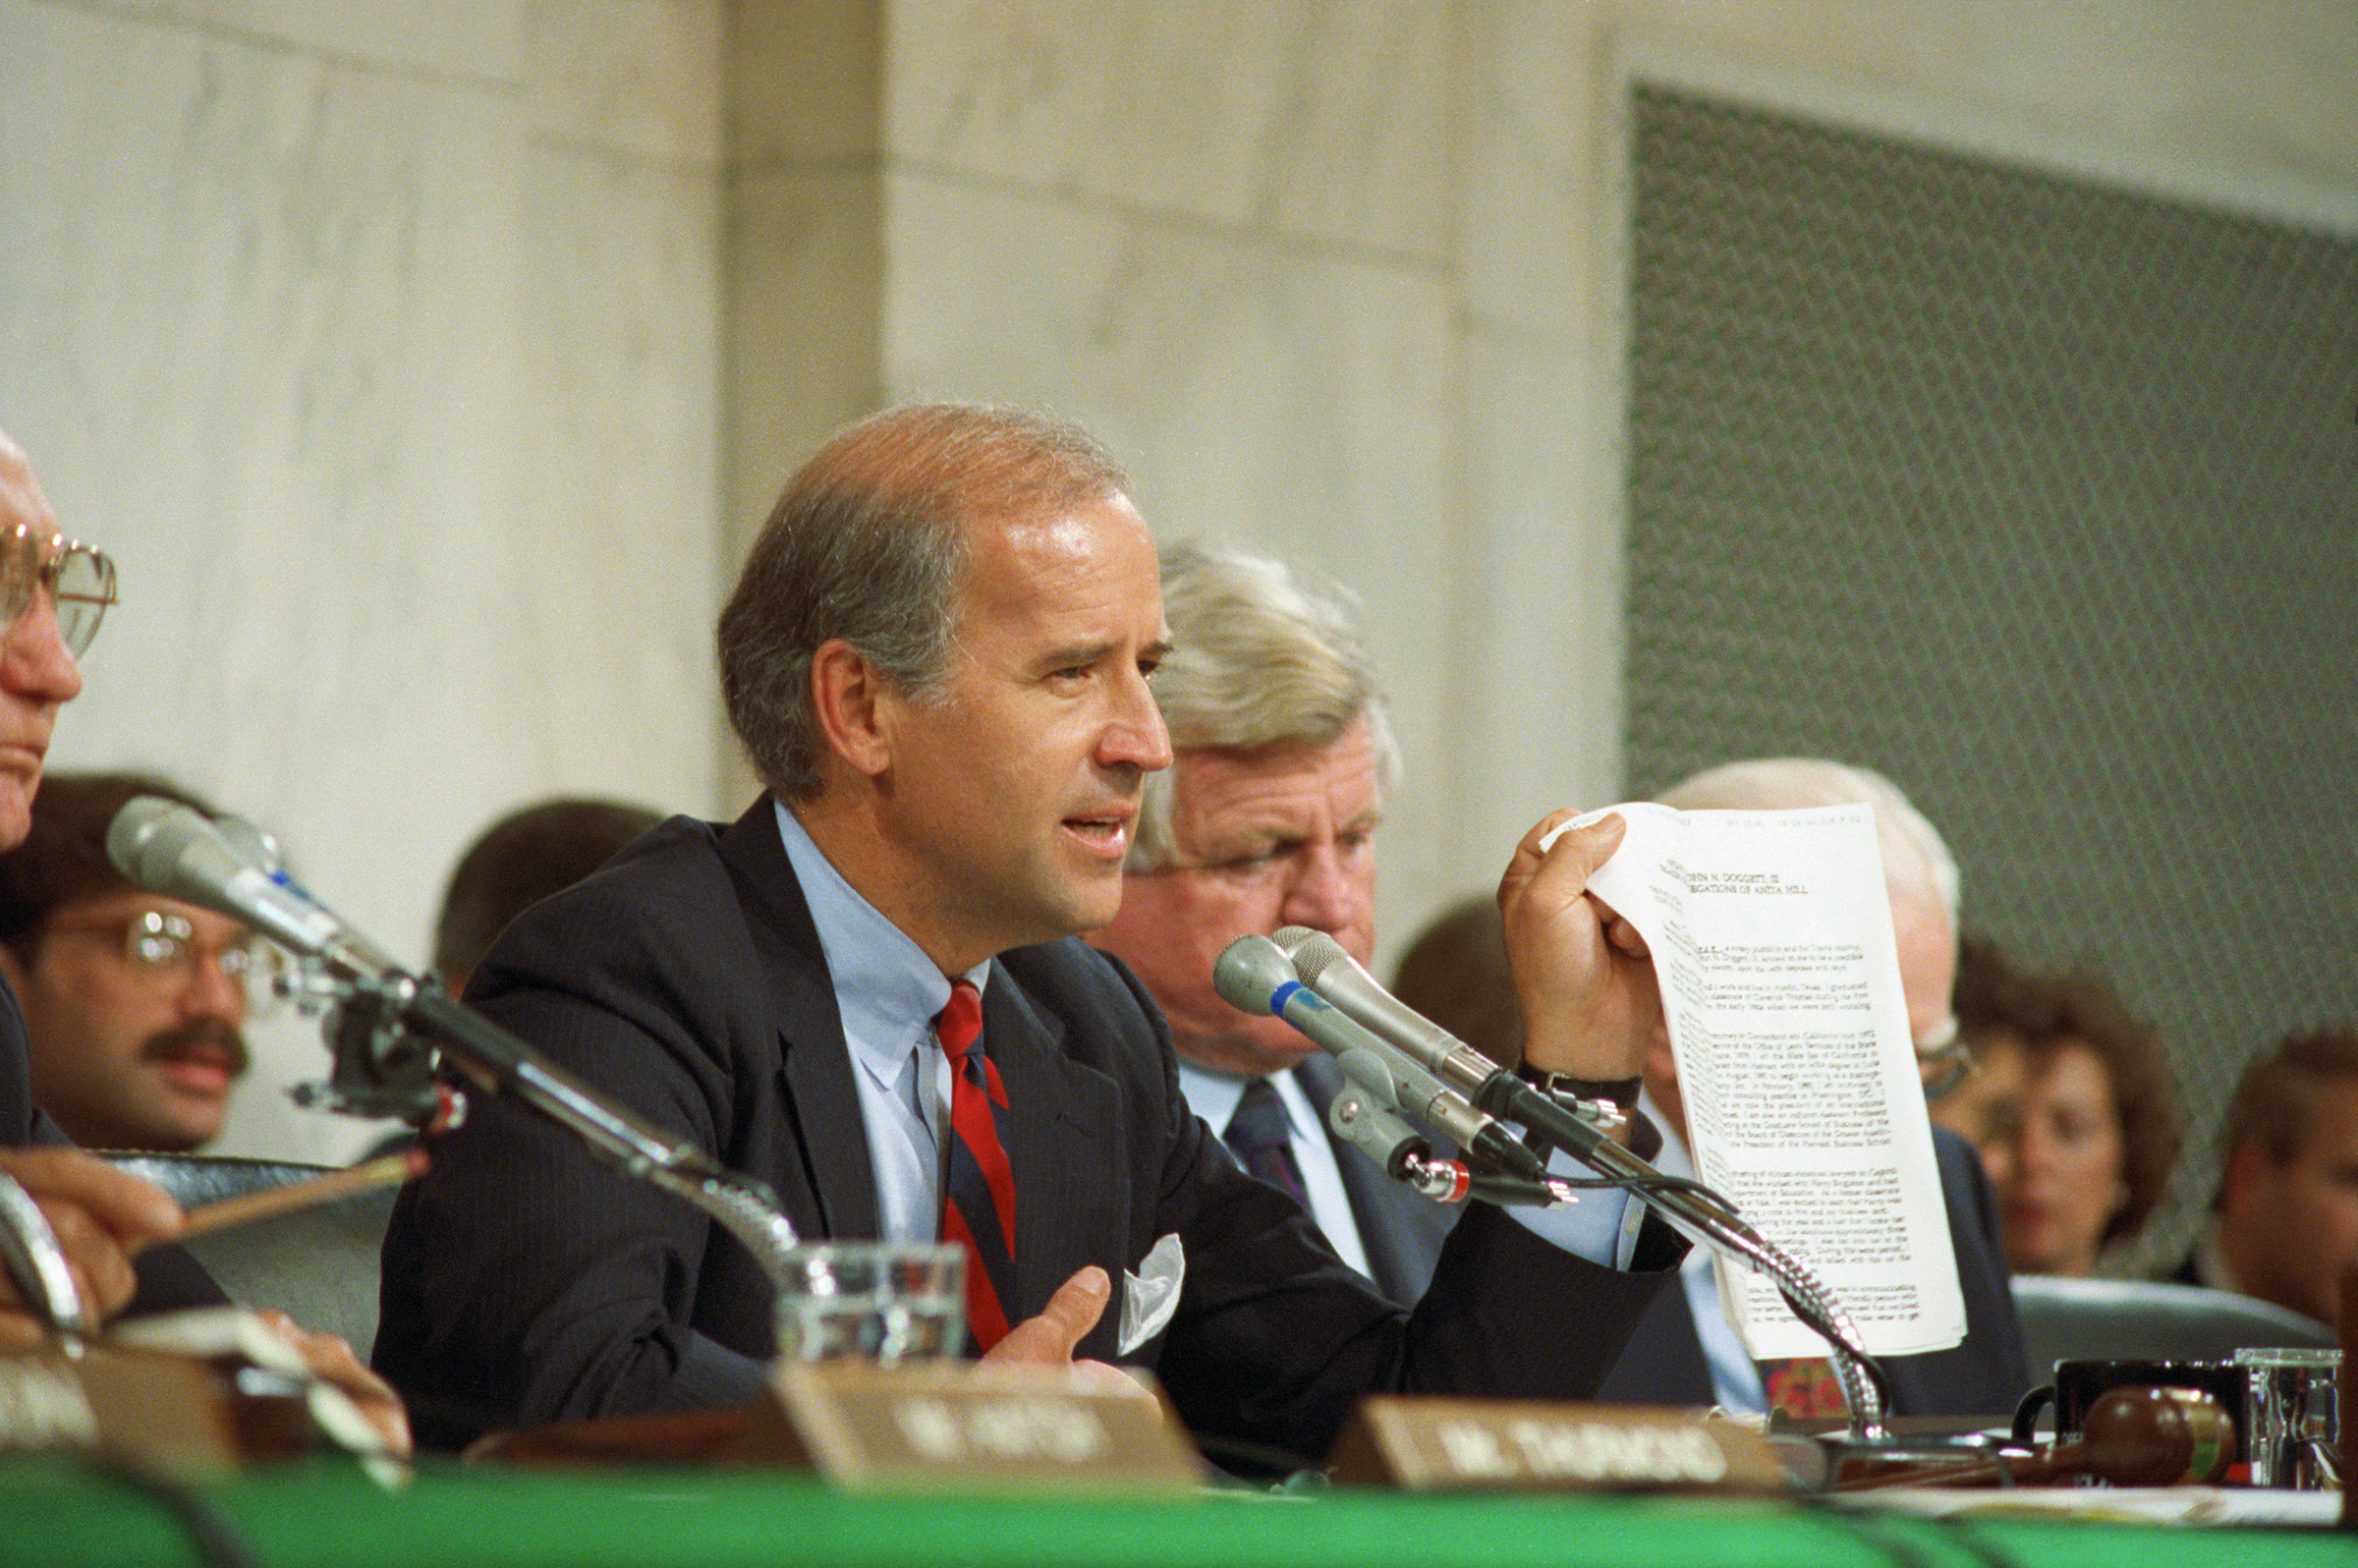 After Anita Hill accuses Clarence Thomas of sexual harassment, Biden presides over an all-white-male panel in the Senate in 1991 (Getty Images)